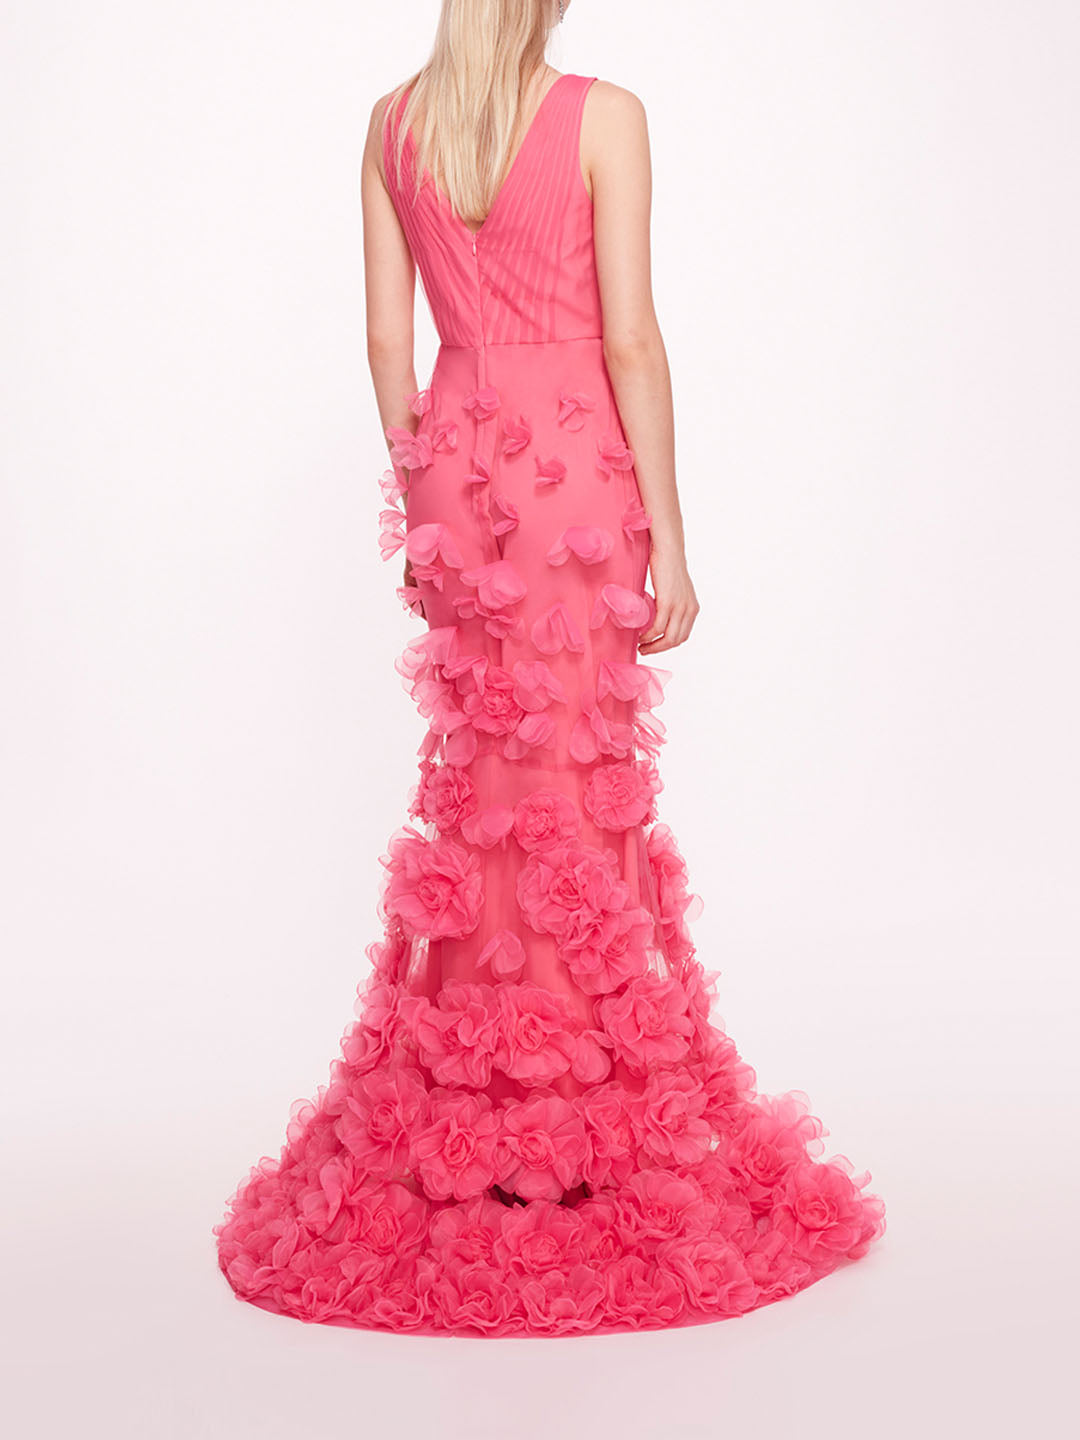 Tulle Rosette Gown | Marchesa